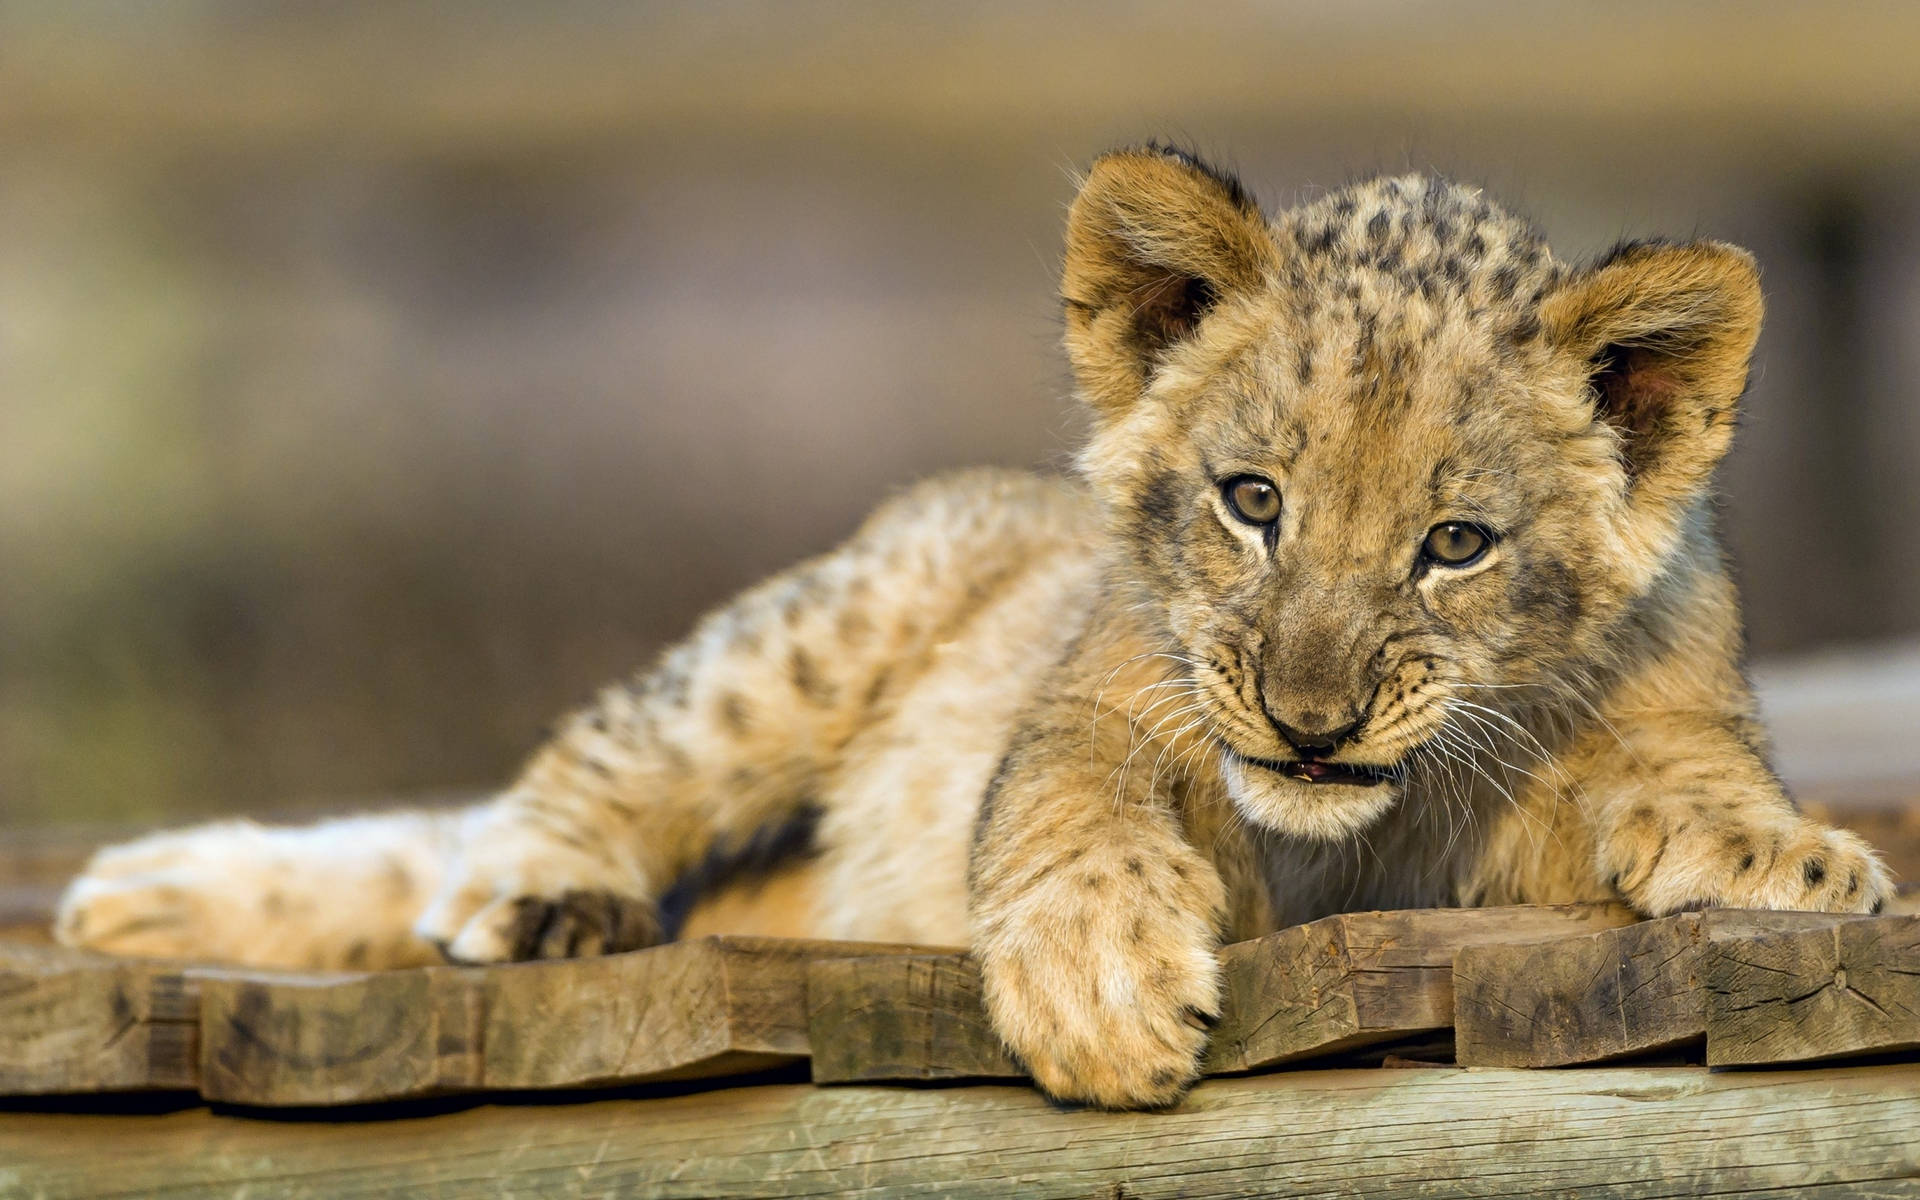 Lion Cub On Wooden Planks